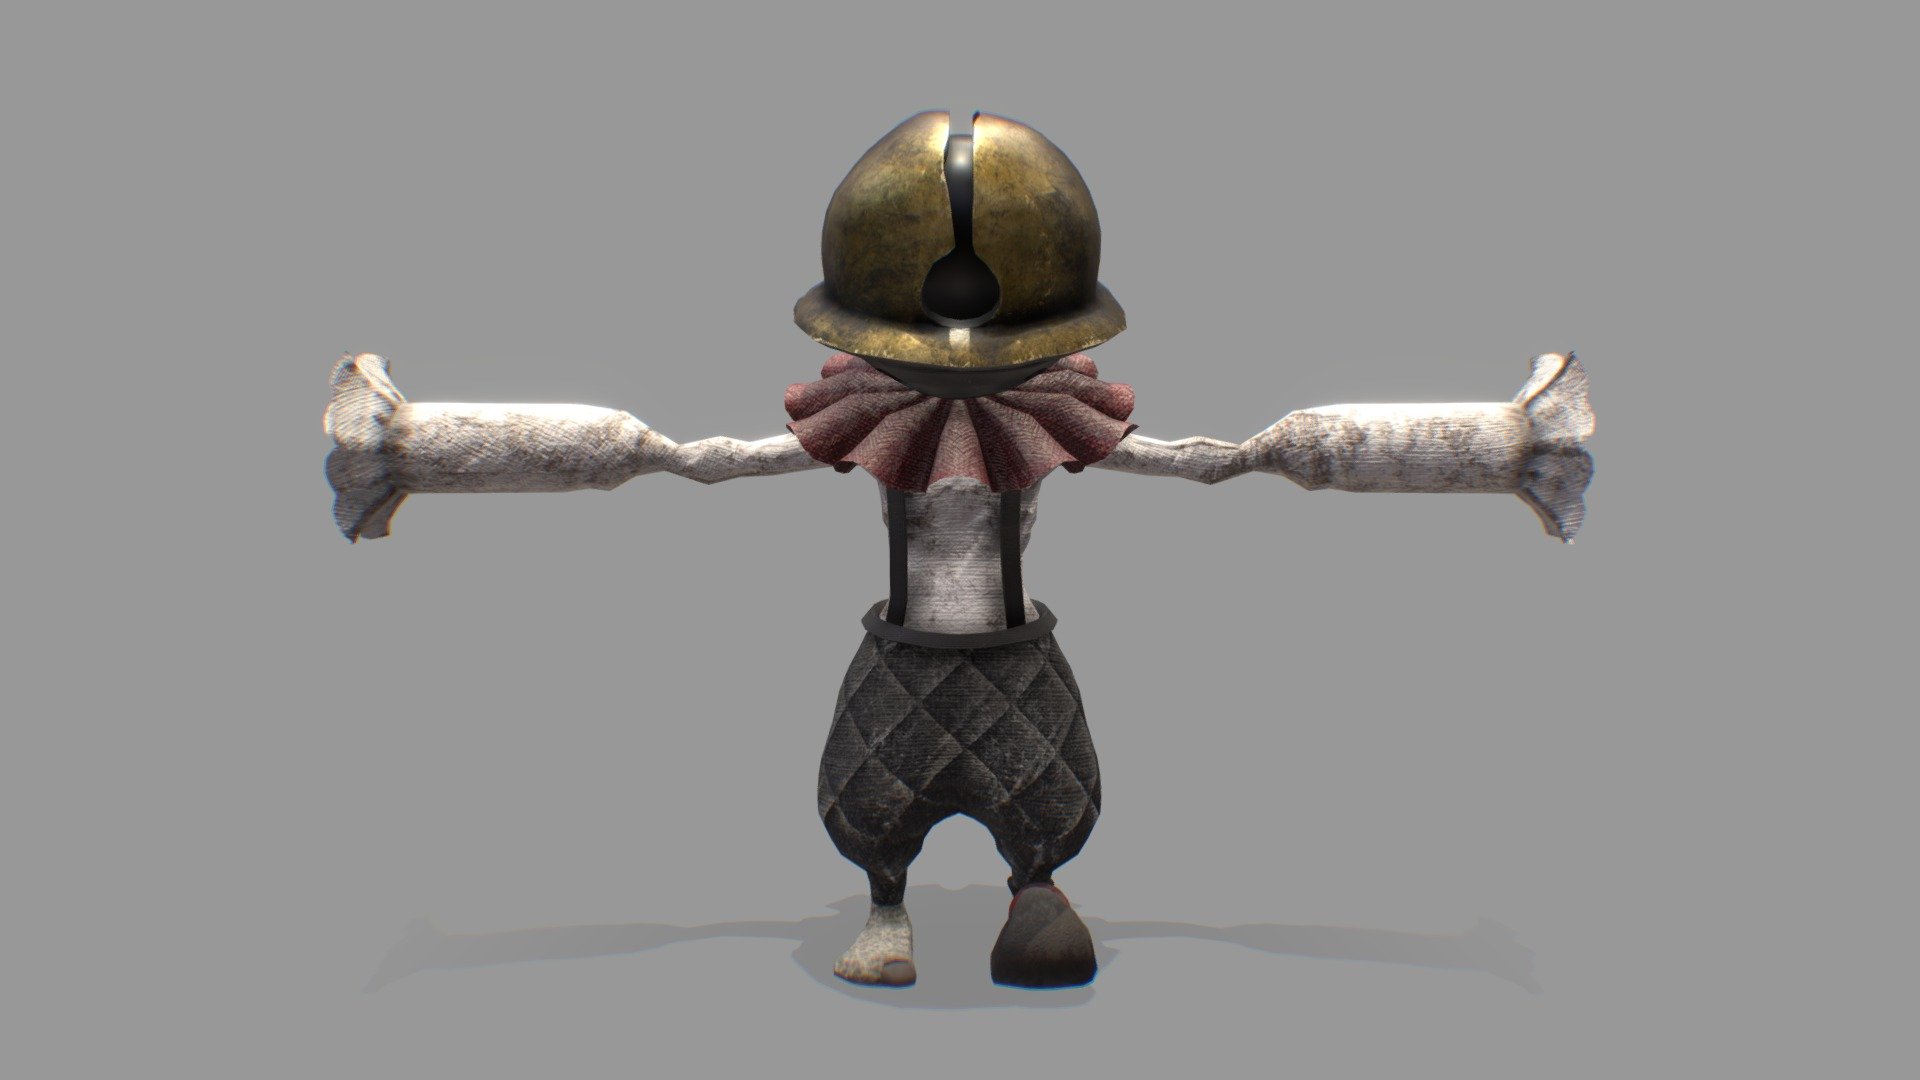 3D Model of the main character for Tamed: The Unseen Show, a 3D Puzzle Stealth side scroller where you play as this tiny clown with a rattle for a head.

Download link of the vertical slice:
https://popcoinstudios.itch.io/tamed-the-unseen-show - Tamed: The Unseen Show - Clown - 3D model by dvsilvart 3d model